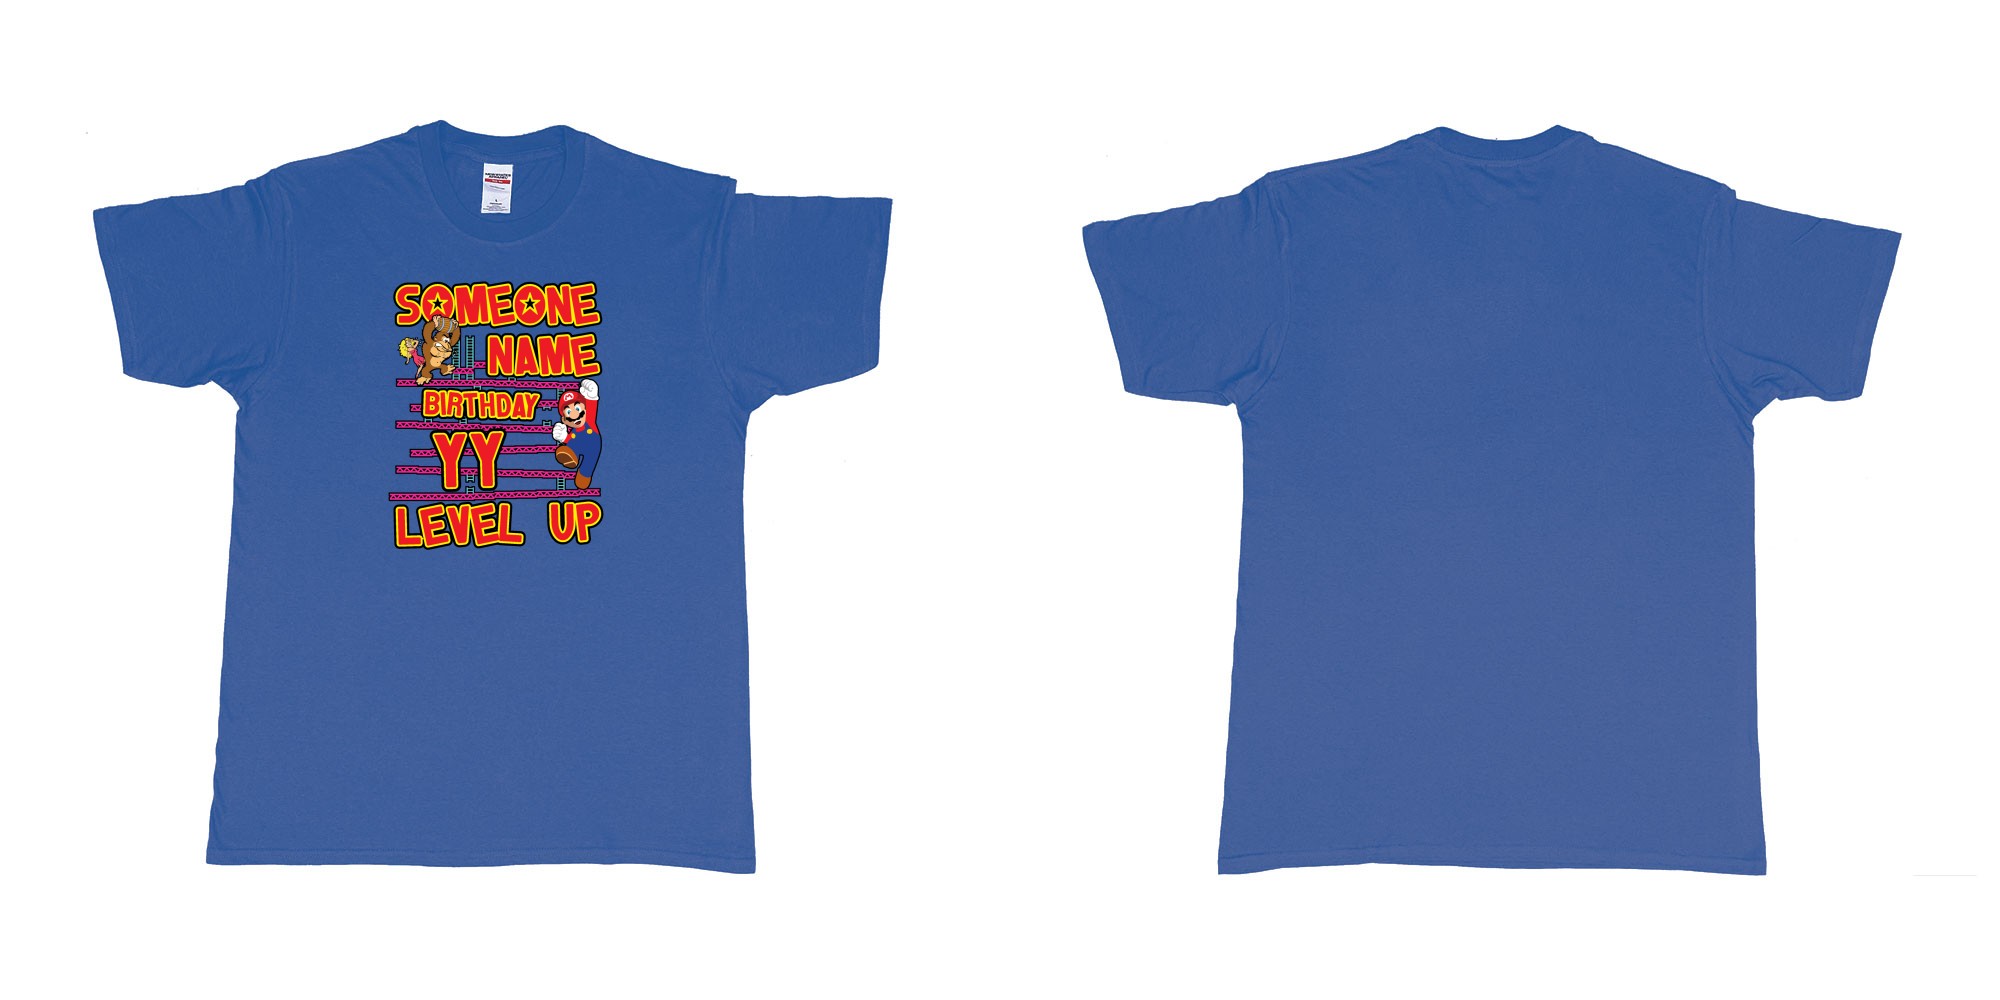 Custom tshirt design donkey kong classic arcade game custom birthday t shirt digital printing bali in fabric color royal-blue choice your own text made in Bali by The Pirate Way